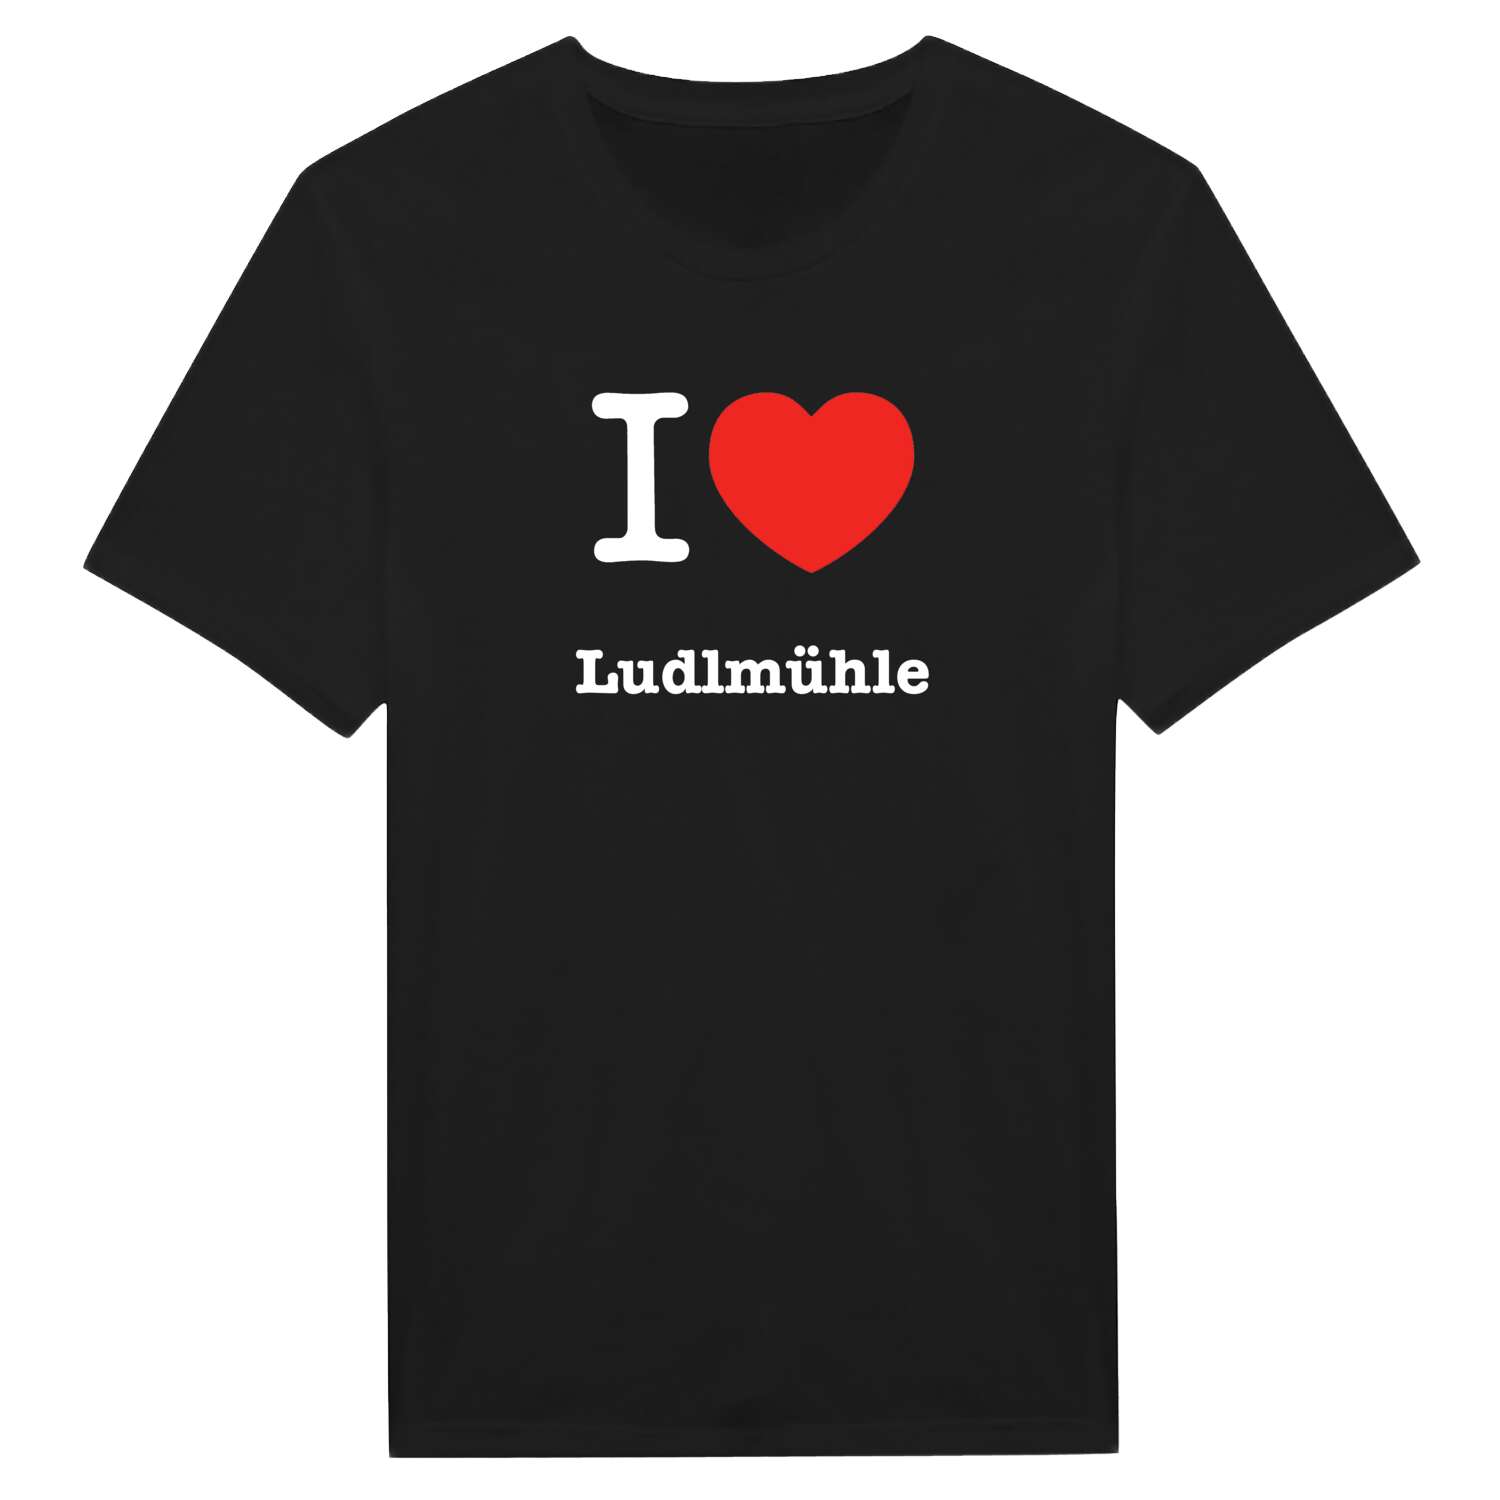 Ludlmühle T-Shirt »I love«